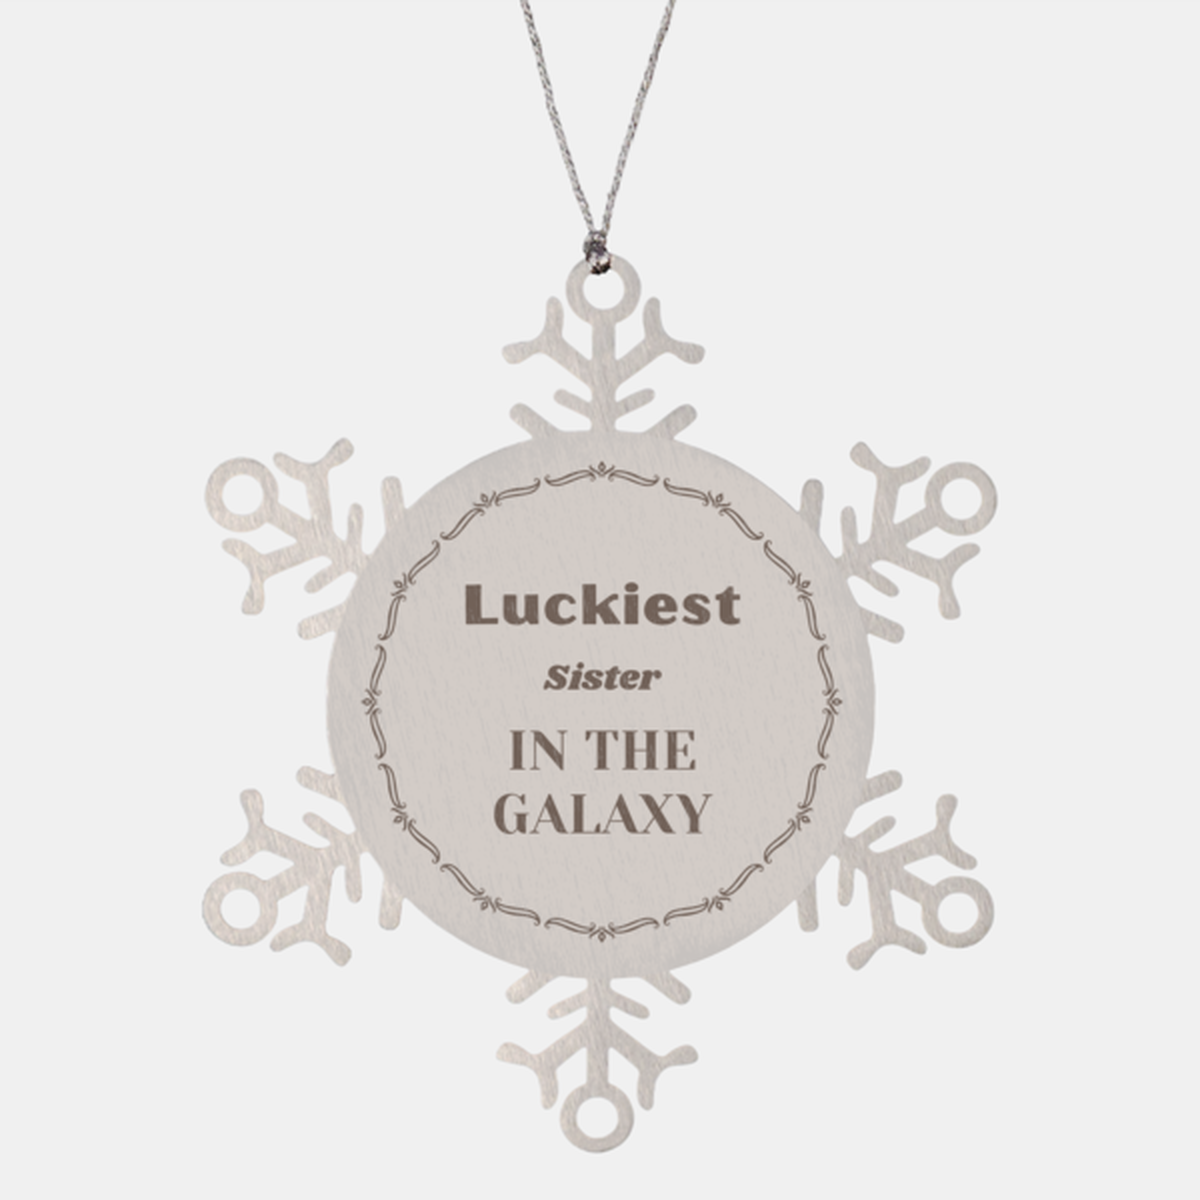 Luckiest Sister in the Galaxy, To My Sister Ornament Gifts, Christmas Sister Snowflake Ornament Gifts, X-mas Decorations Unique Gifts For Sister Men Women